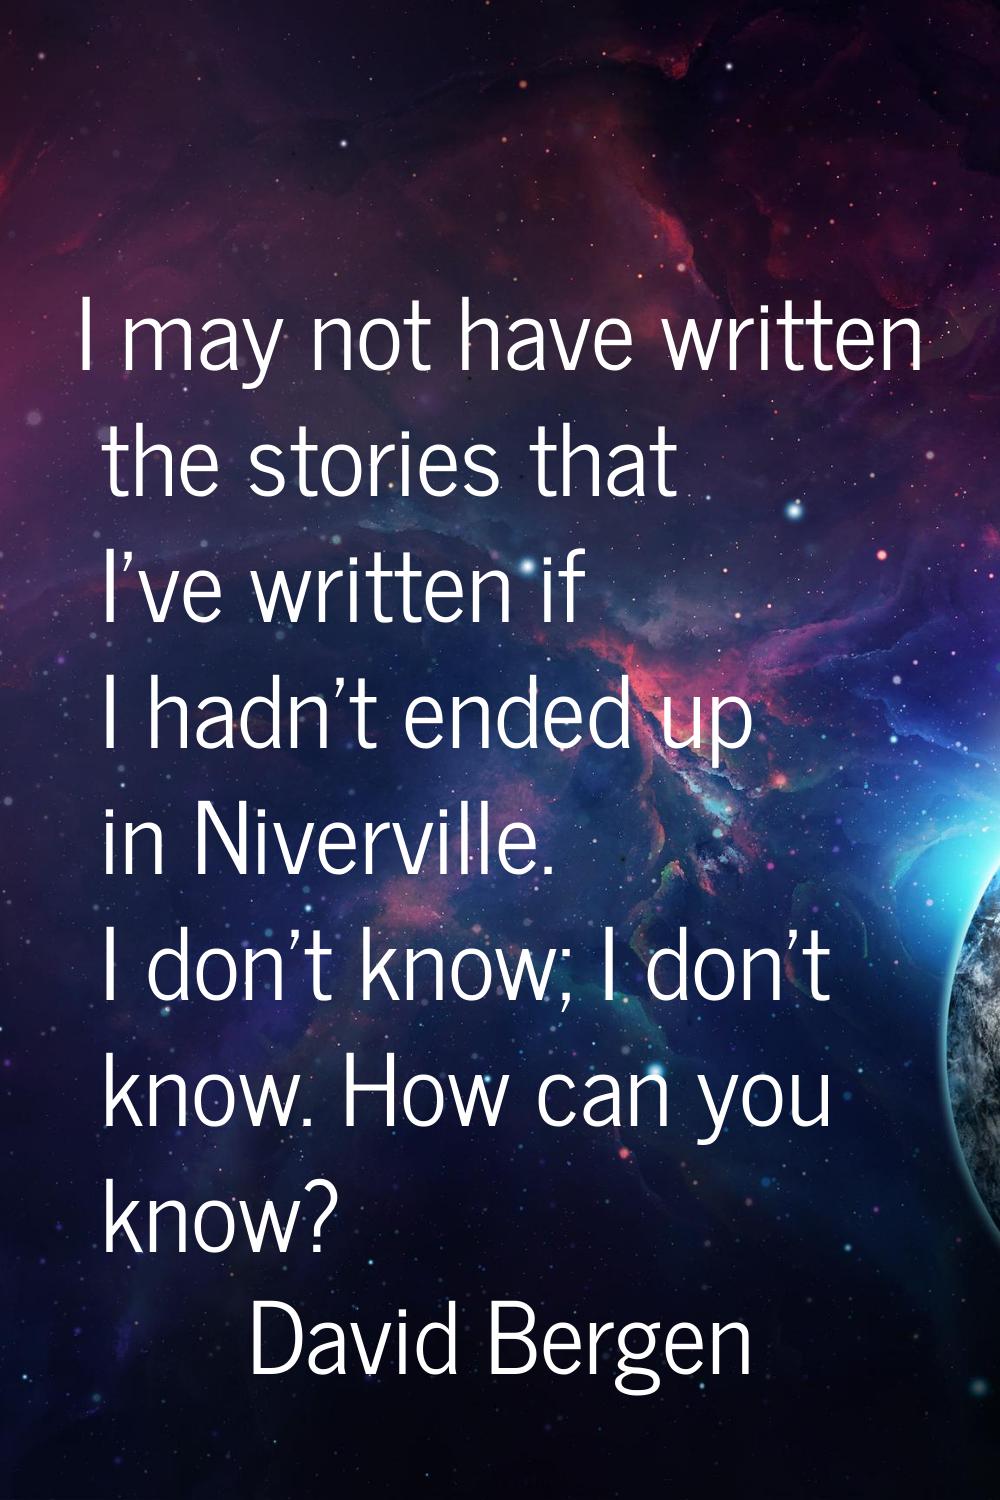 I may not have written the stories that I've written if I hadn't ended up in Niverville. I don't kn